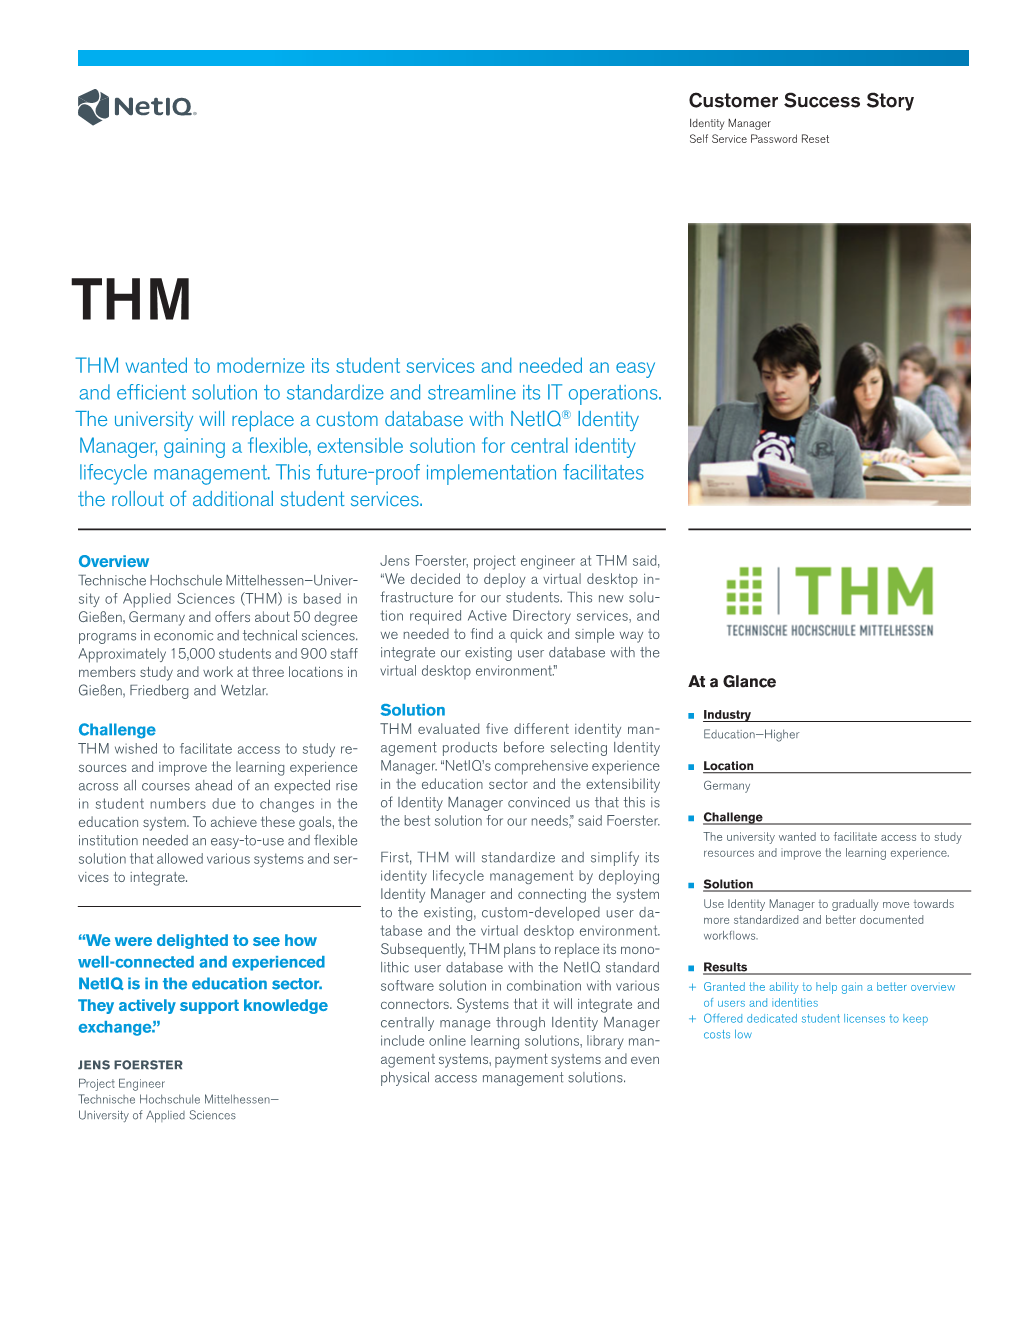 THM Wanted to Modernize Its Student Services and Needed an Easy and Efficient Solution to Standardize and Streamline Its IT Operations